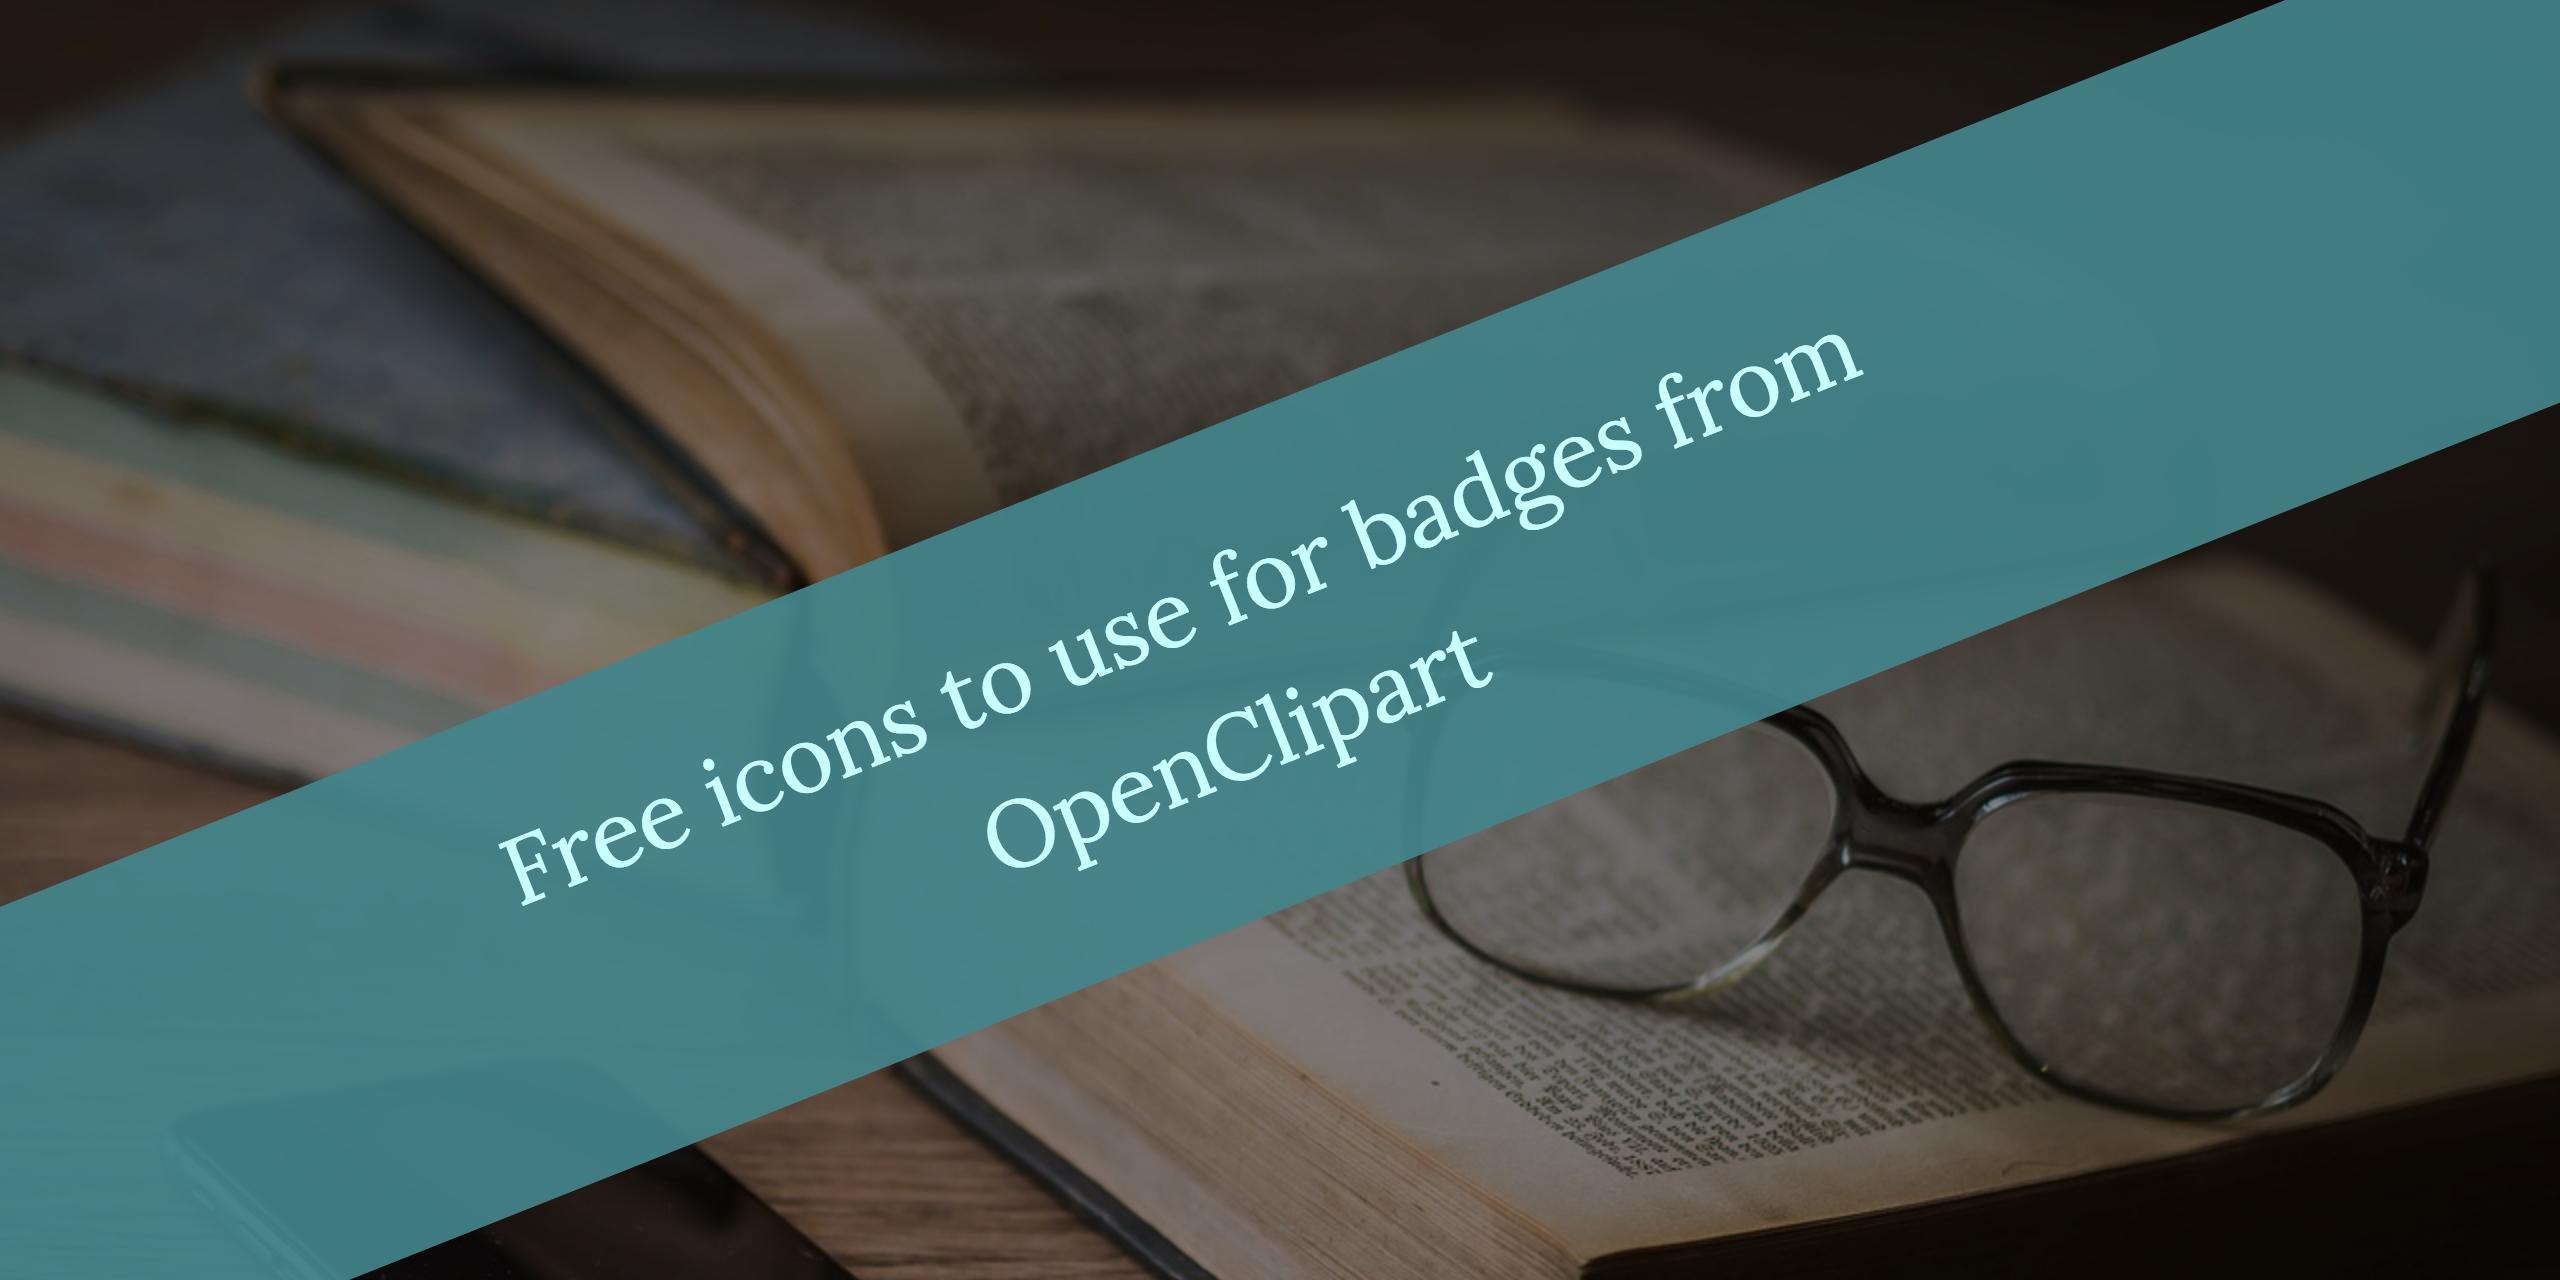 Free icons to use for badges from OpenClipart